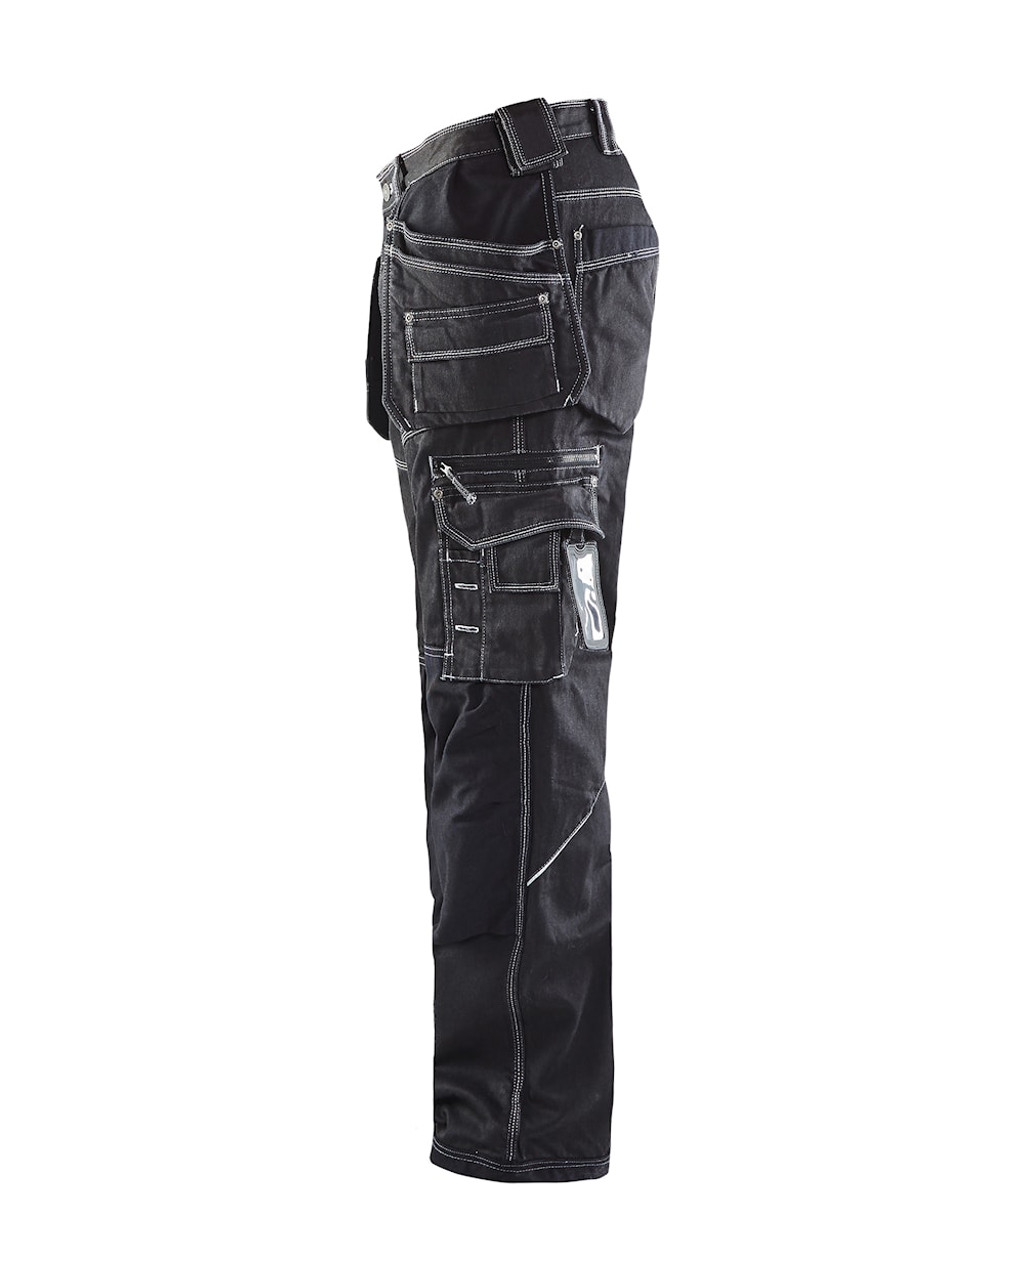 Suitable work Trousers available in Australia BLAKLADER 2-Way Stretch Black Trousers for Electricians